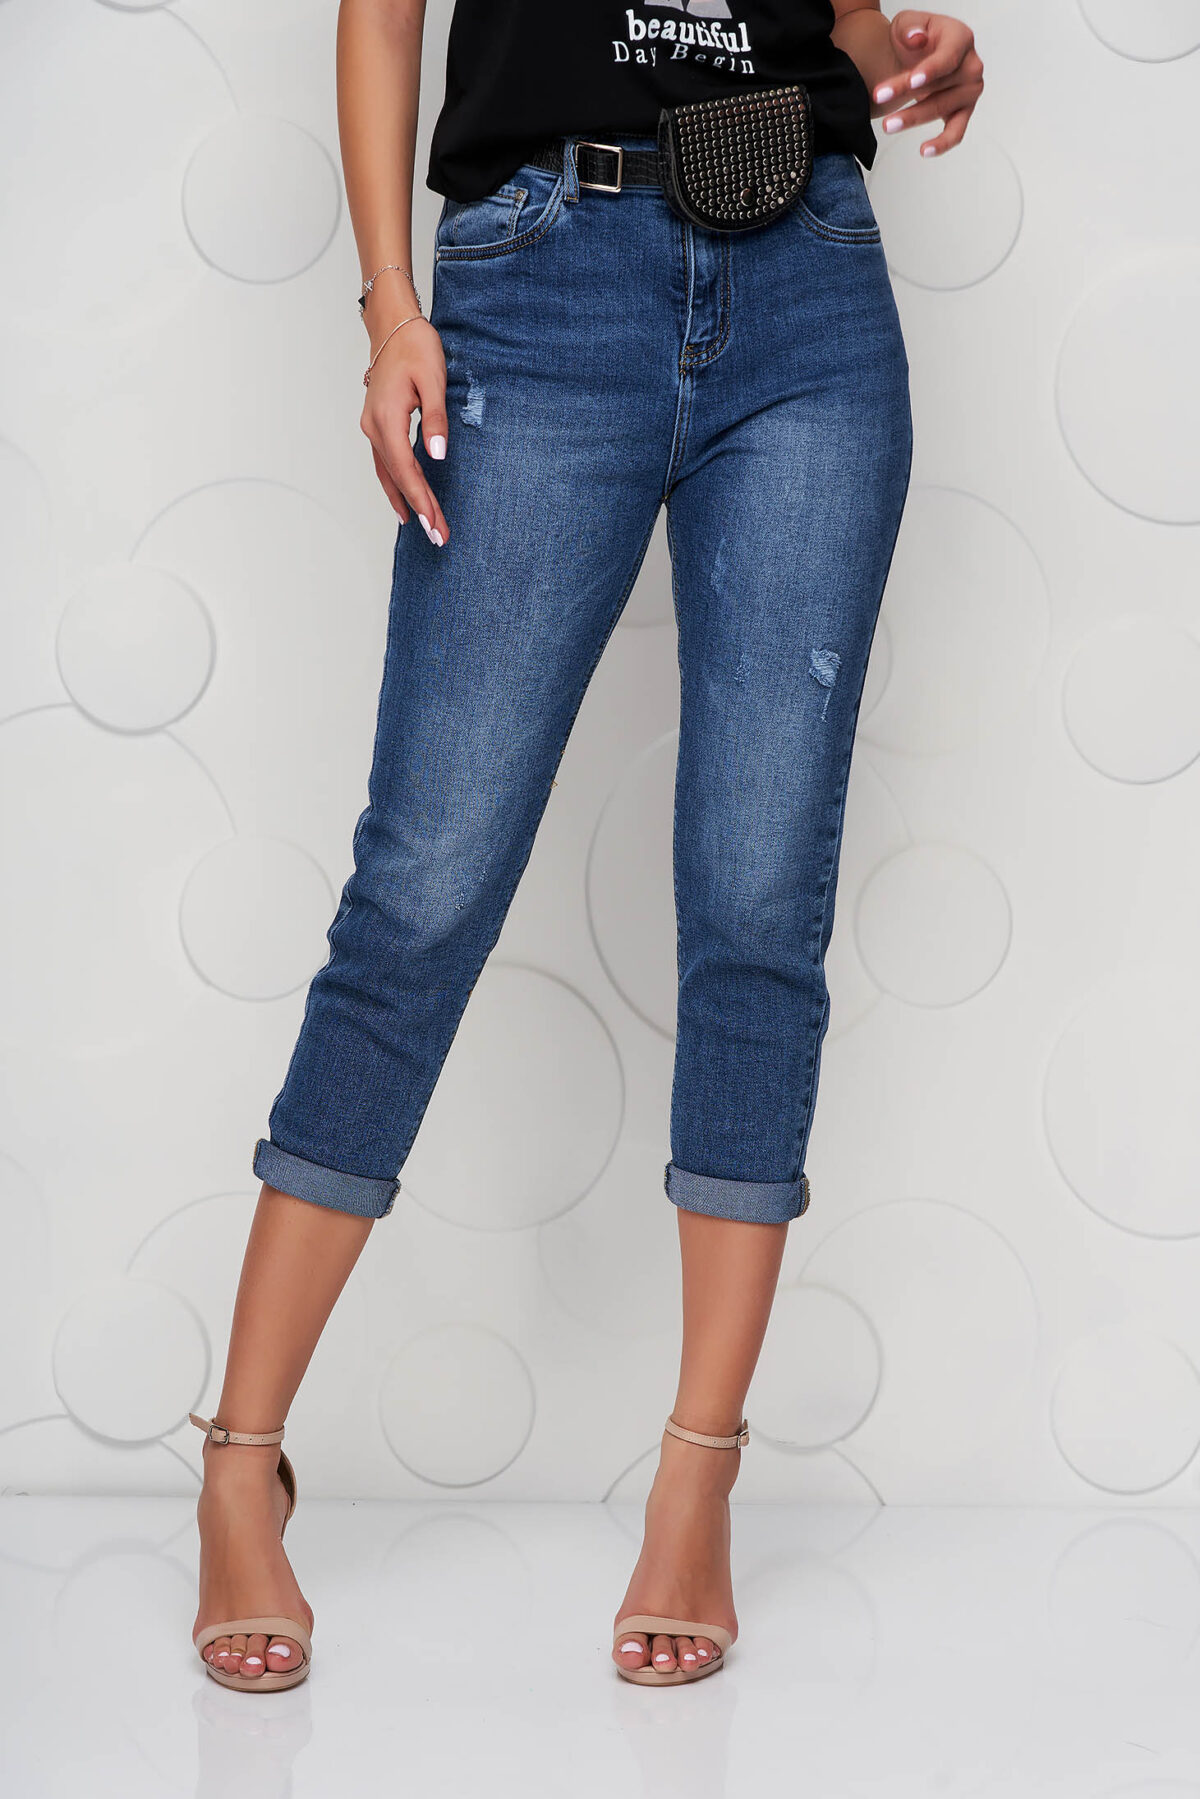 Blue Jeans Casual Accessorized With Belt High Waisted.